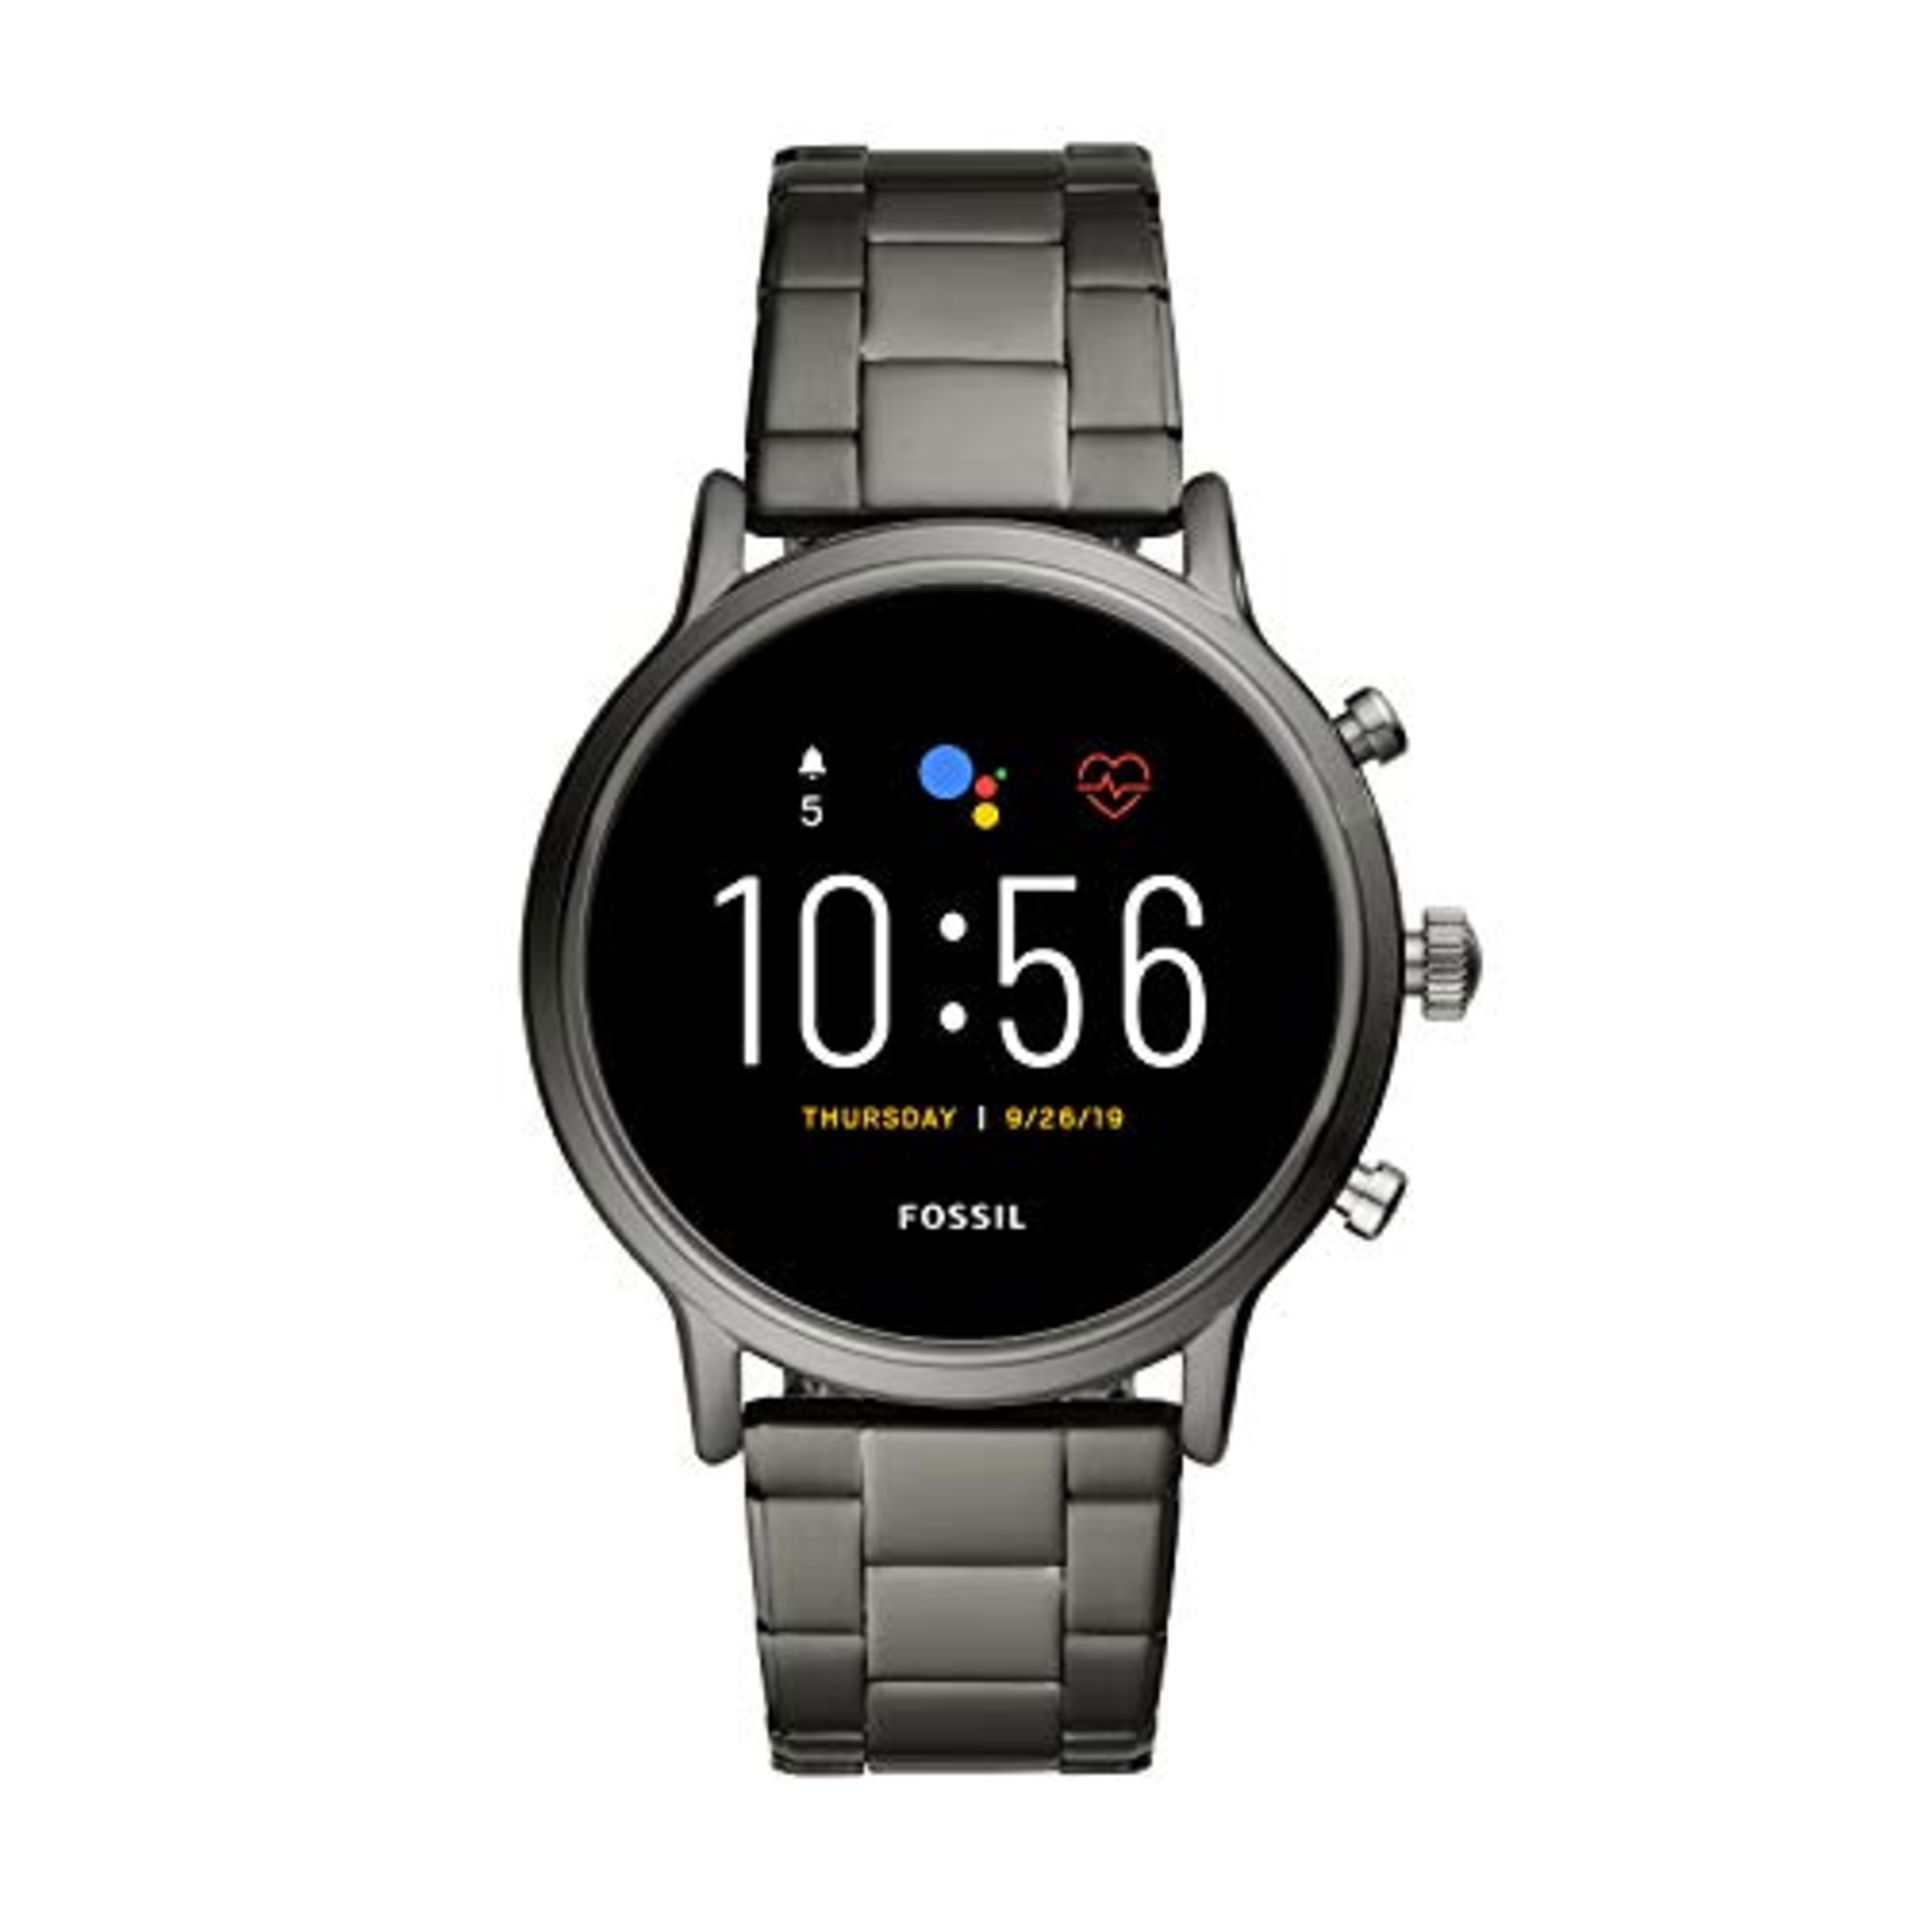 RRP £213.00 Fossil Men's Touchscreen Connected Smartwatch with Stainless Steel Strap FTW4024